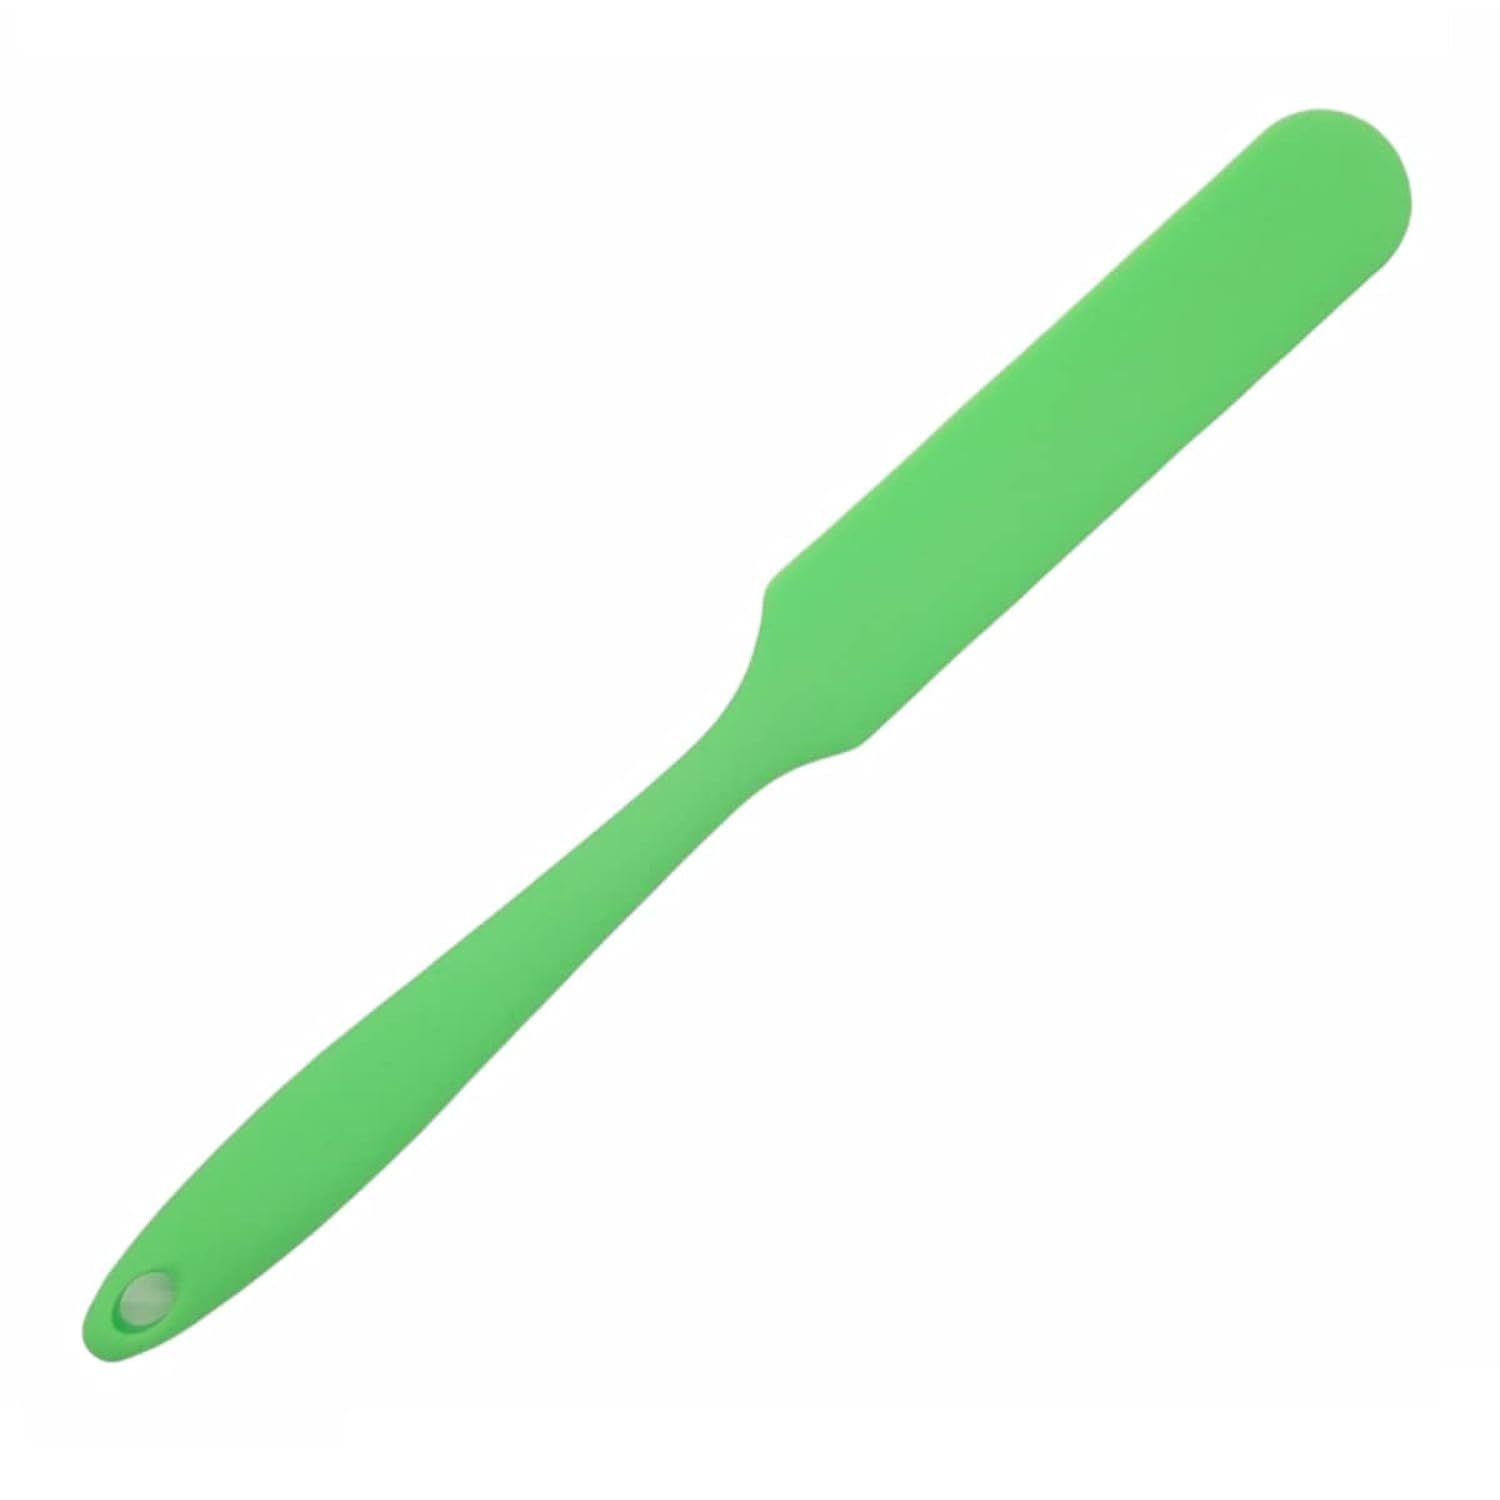 Primary image for 9.5" Long Silicone Spatula Spreader, Bowl Or Jar Scraper, Great For Spreading Fr